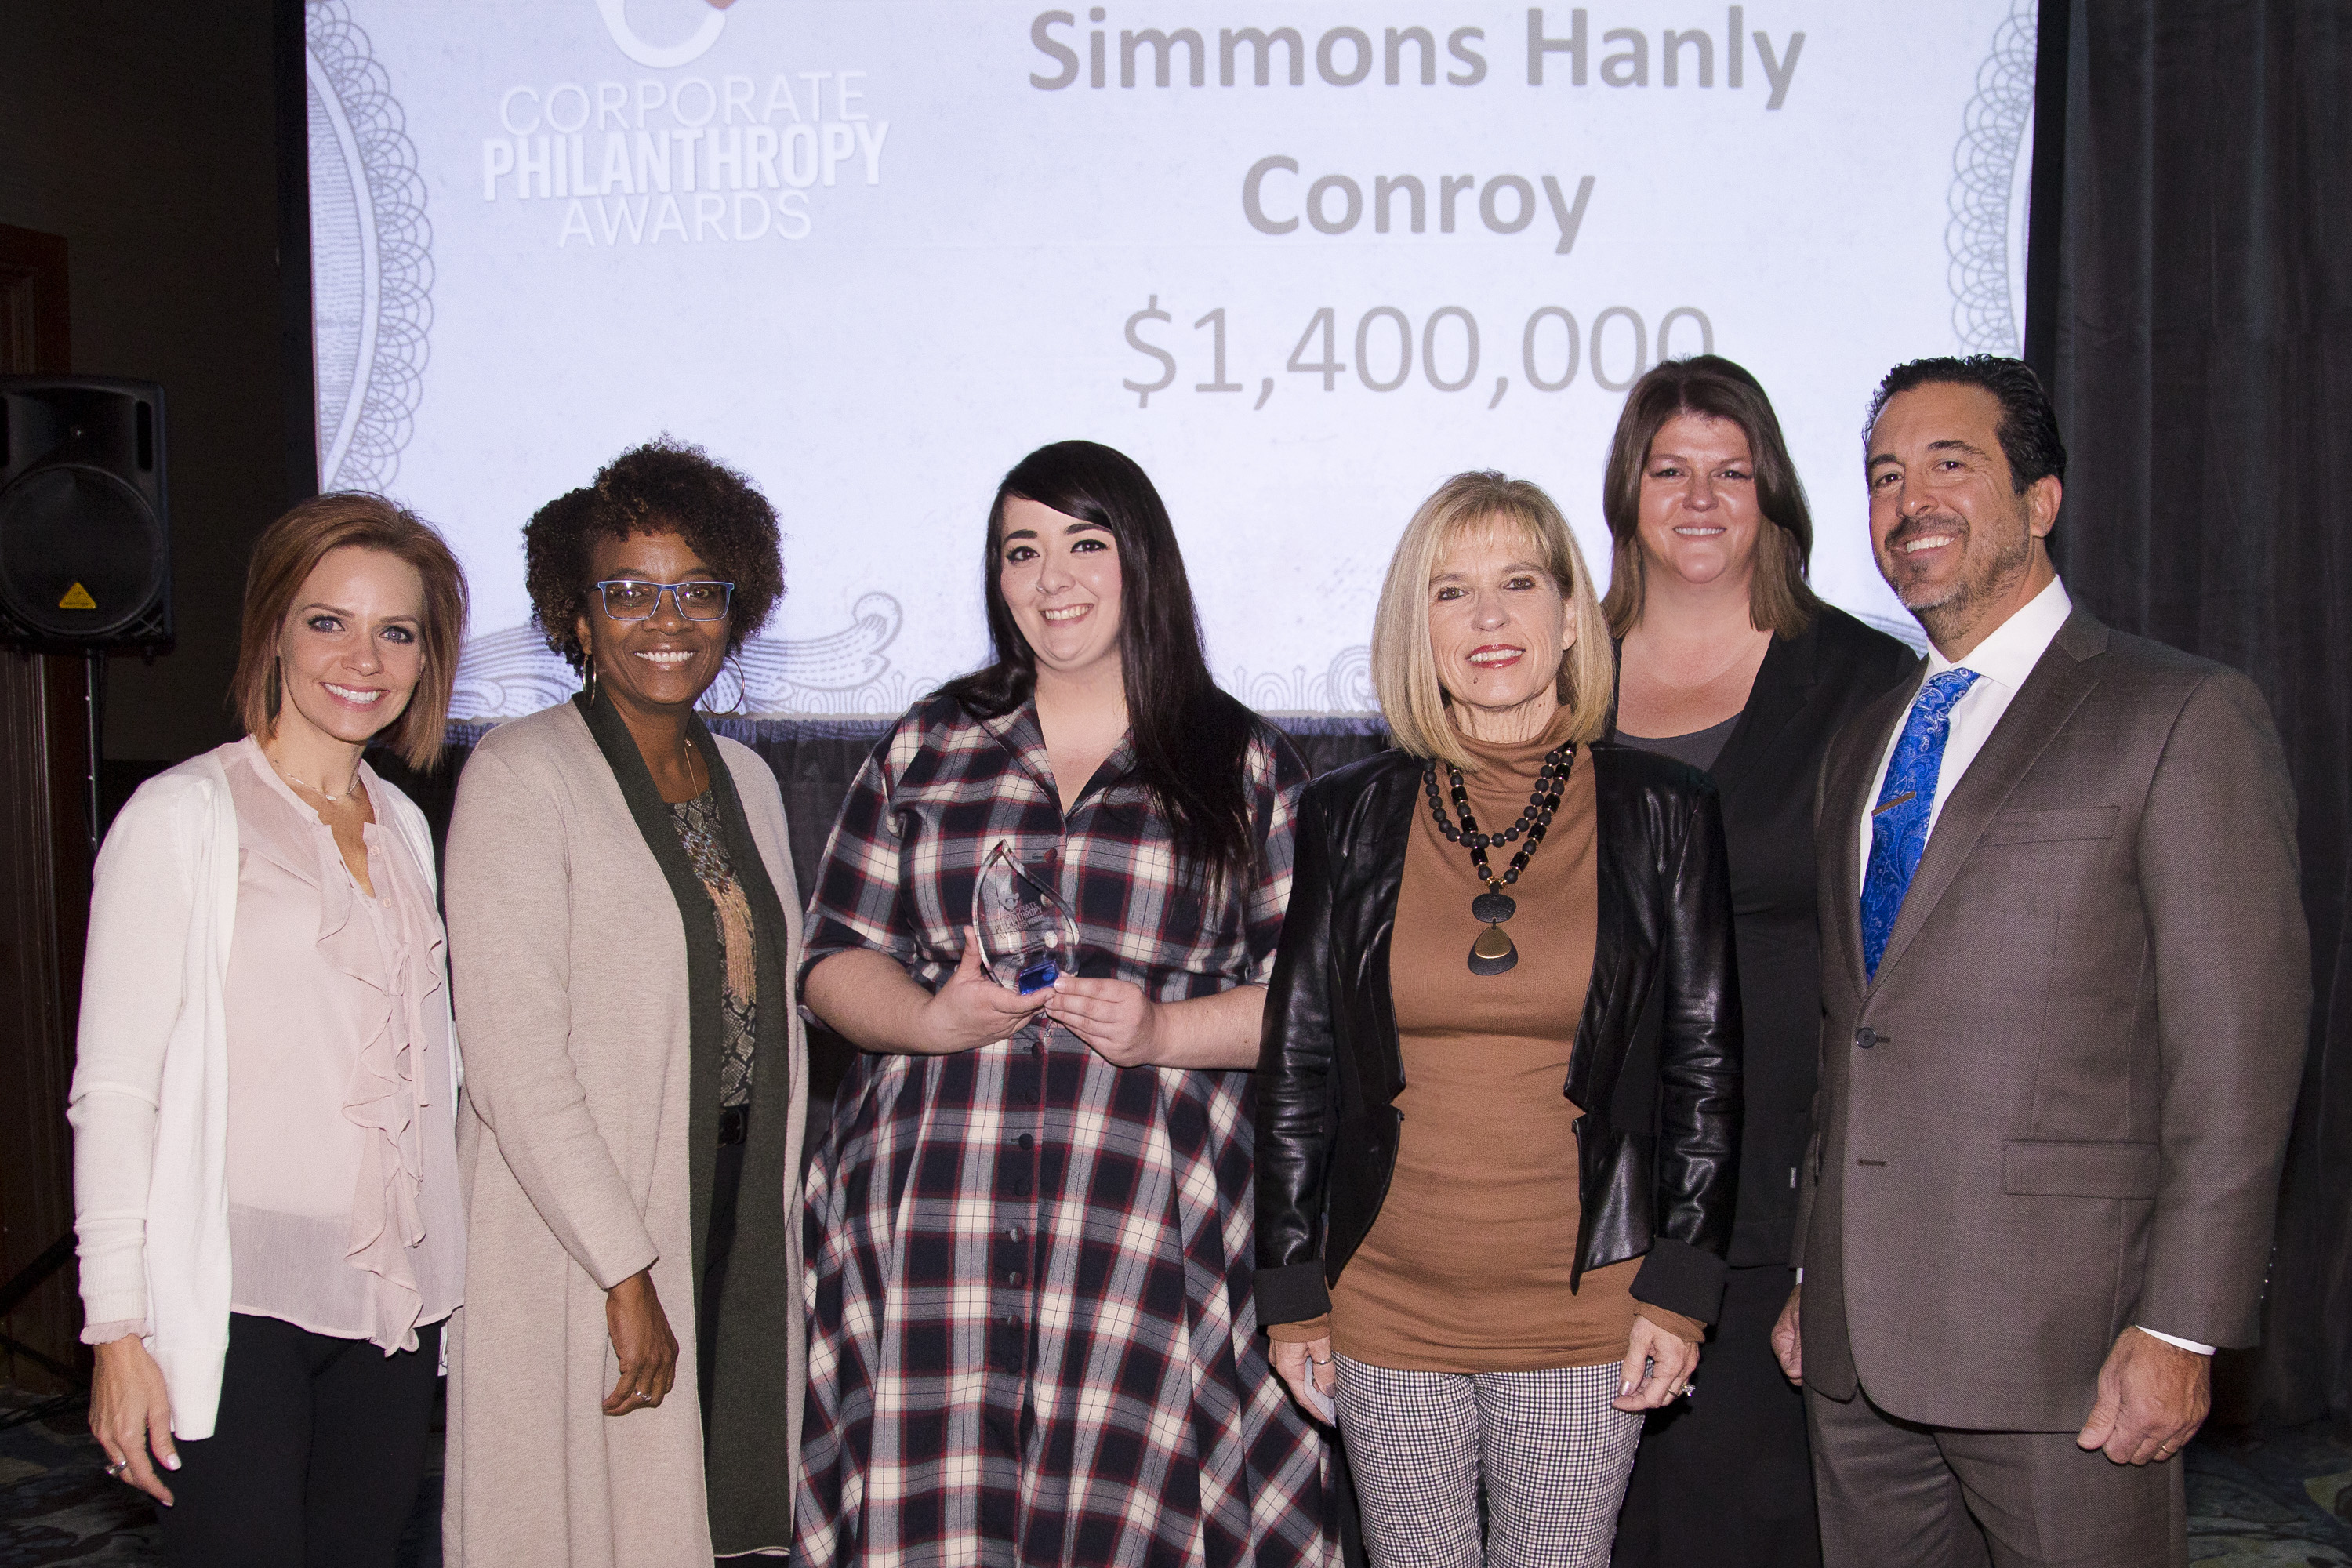 Simmons Hanly Conroy Named Most Philanthropic Midsize Business in St. Louis Metro Area